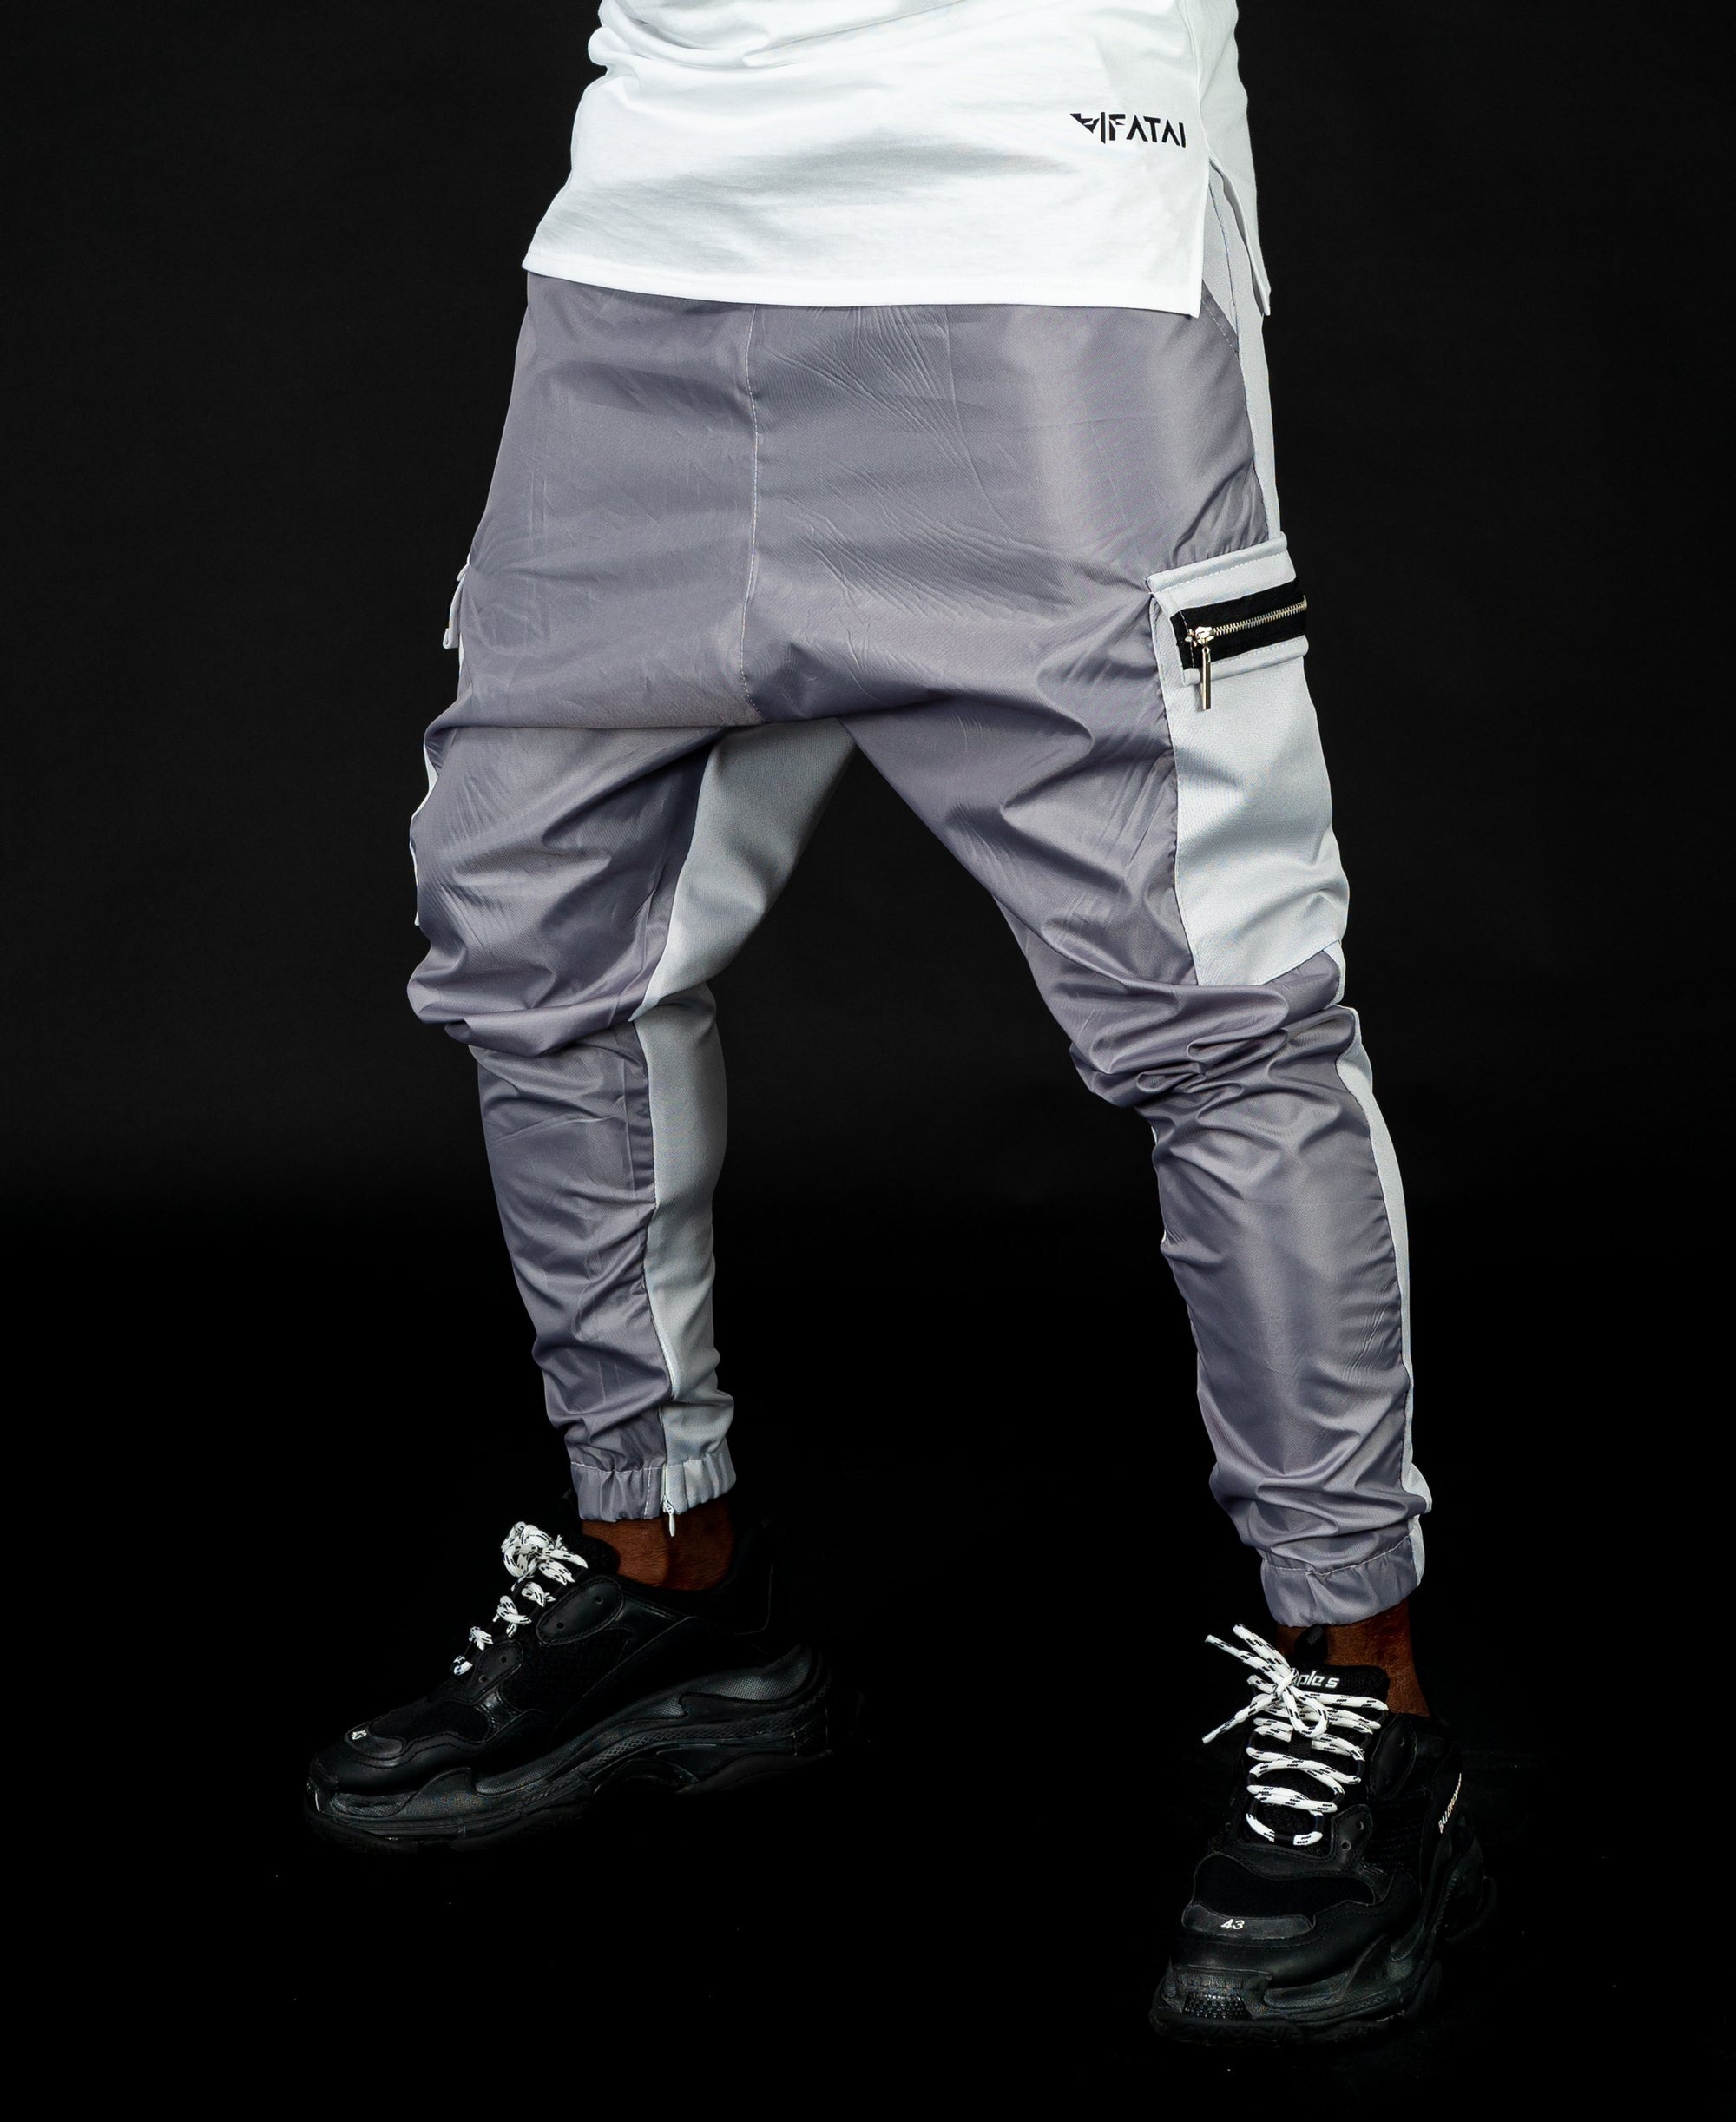 Light Grey trousers with black zip - Fatai Style